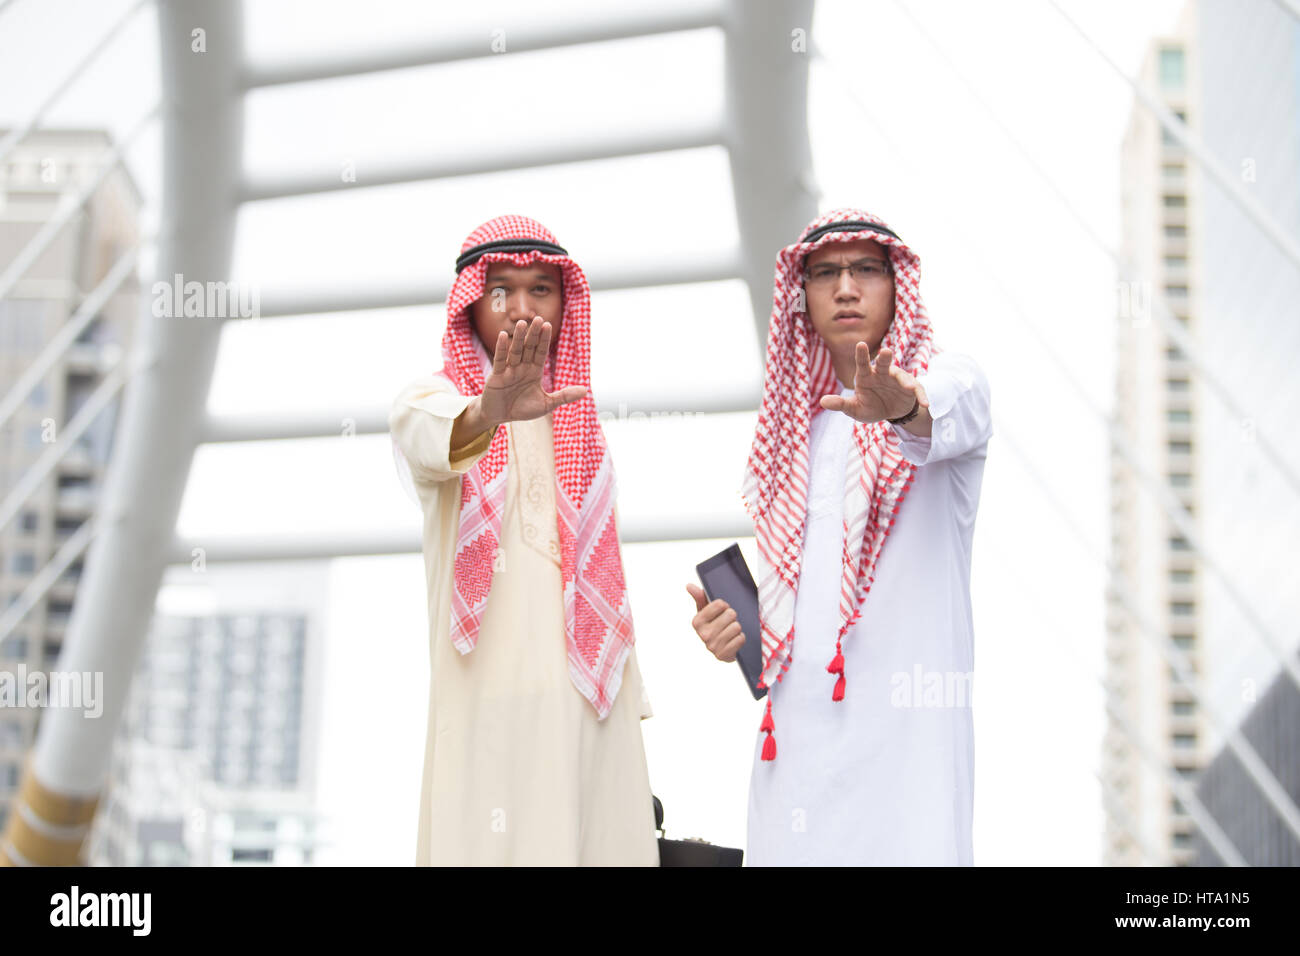 Two Arabian man making a halt gesture with he raised hand indicating a stop (selective focused) Stock Photo